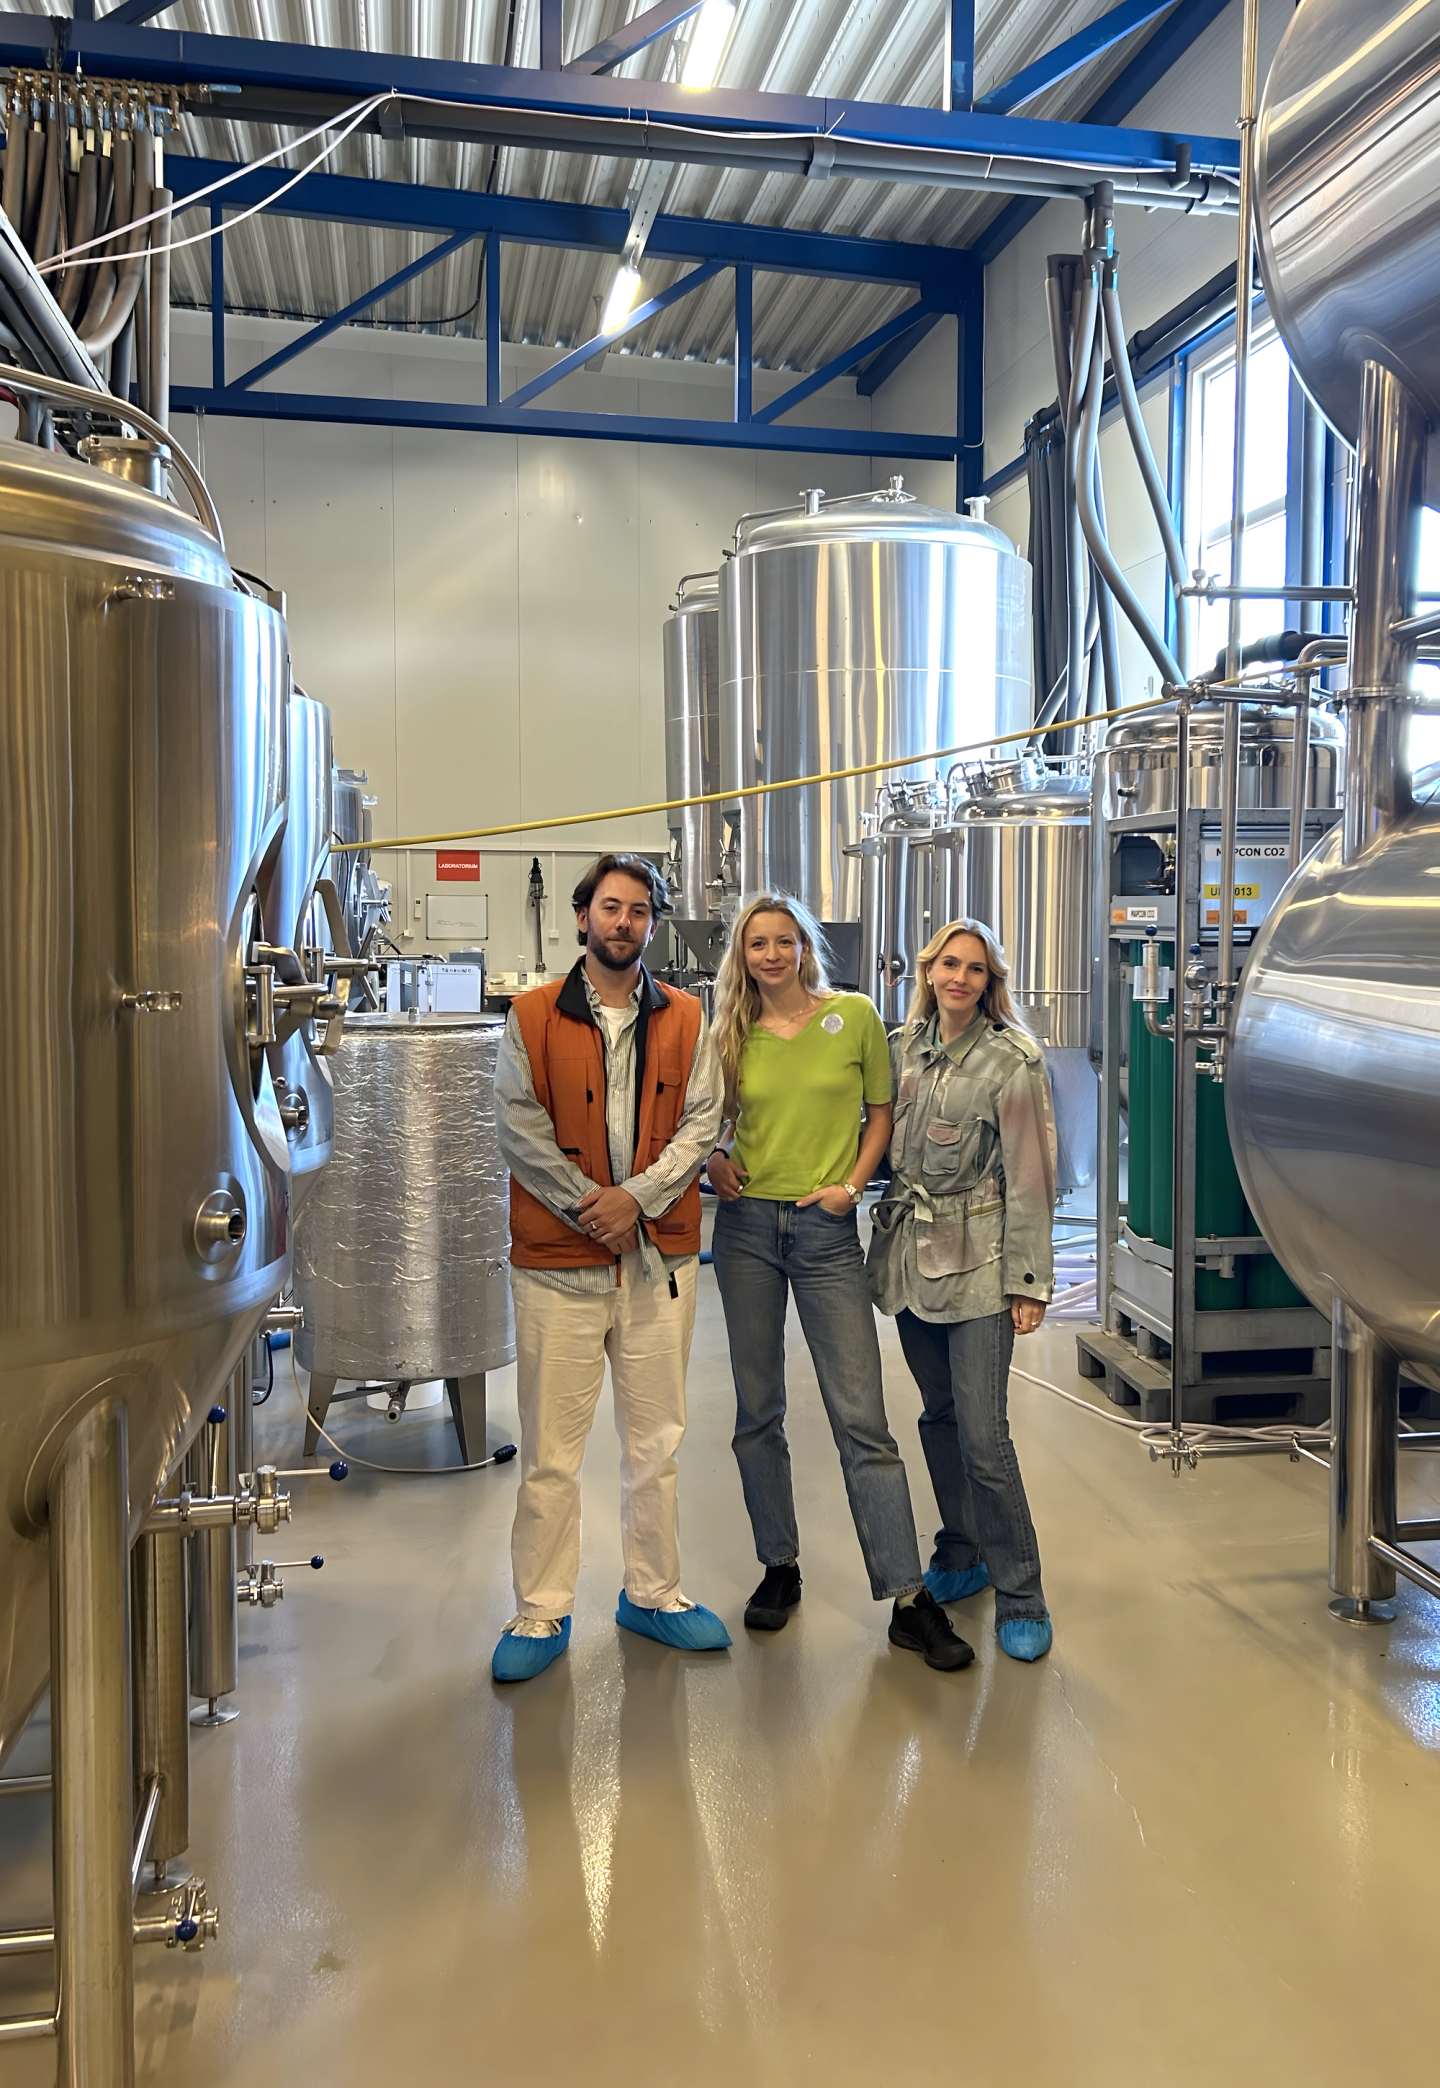 team villbrygg people in front of brewery equipment